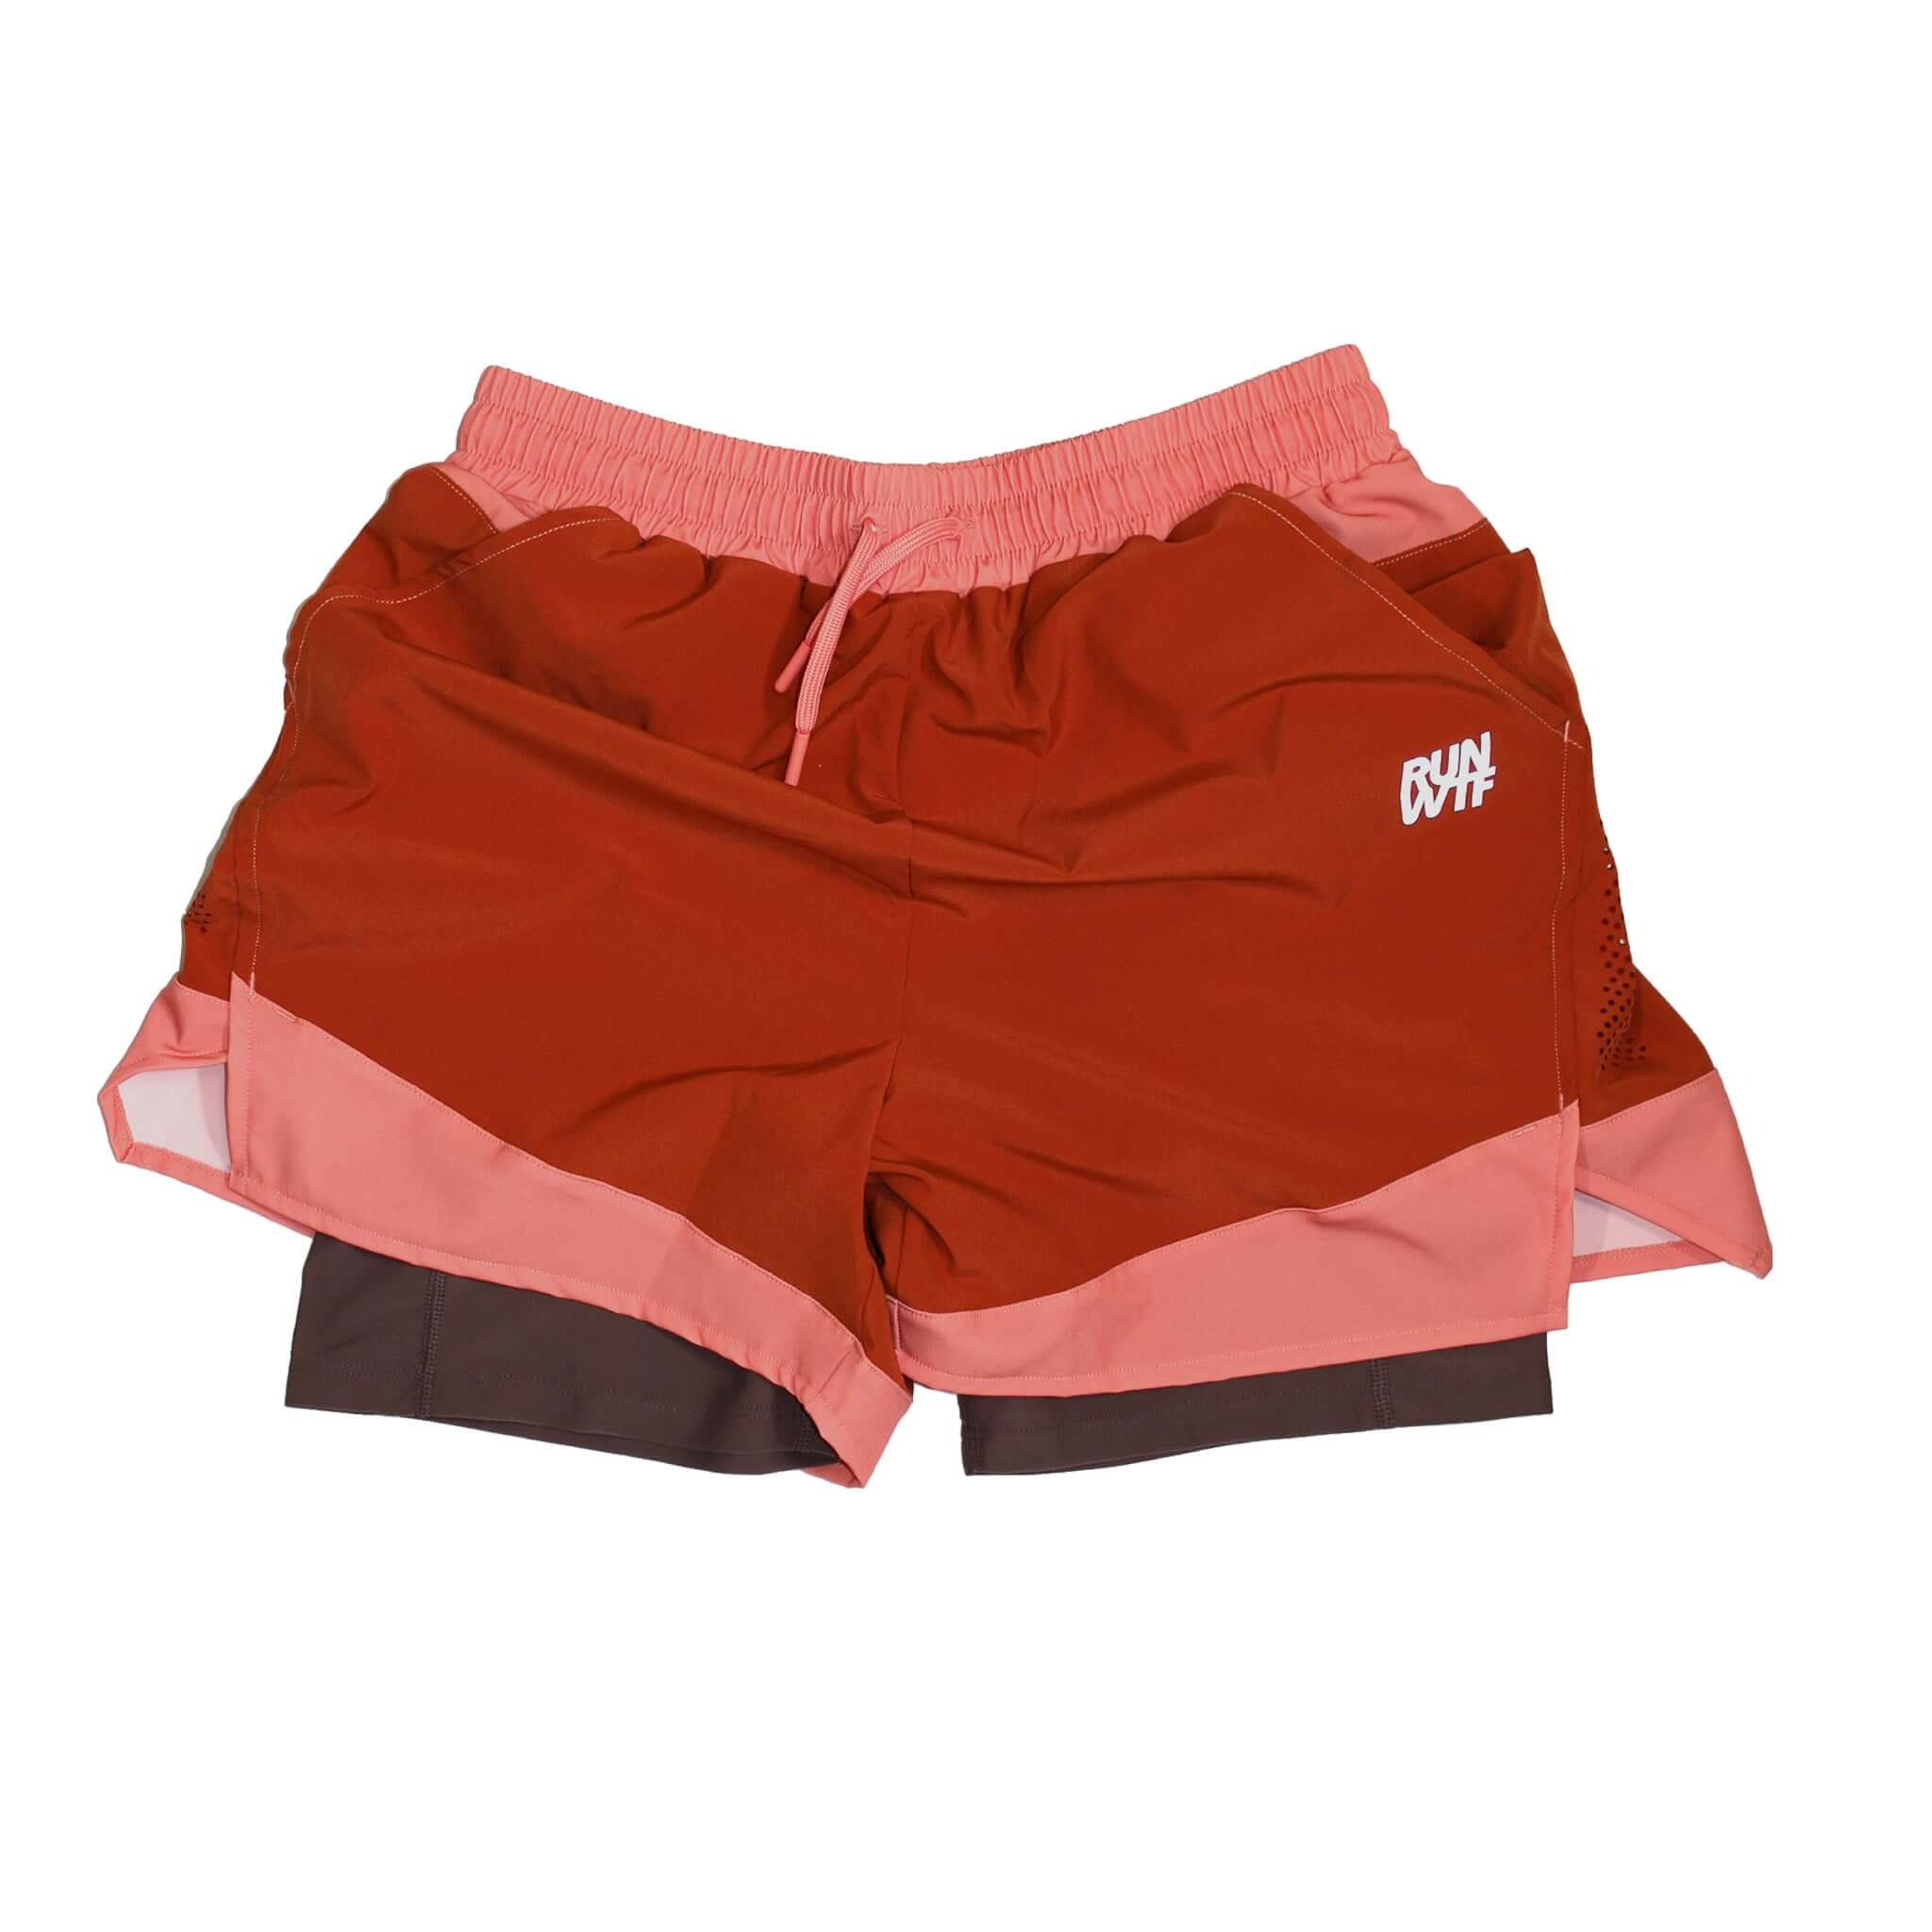 RUN WTF Running Apparel stands for sustainability and high performance. Explore 2in1 Running Shorts for training and competition. Made in Europe. 